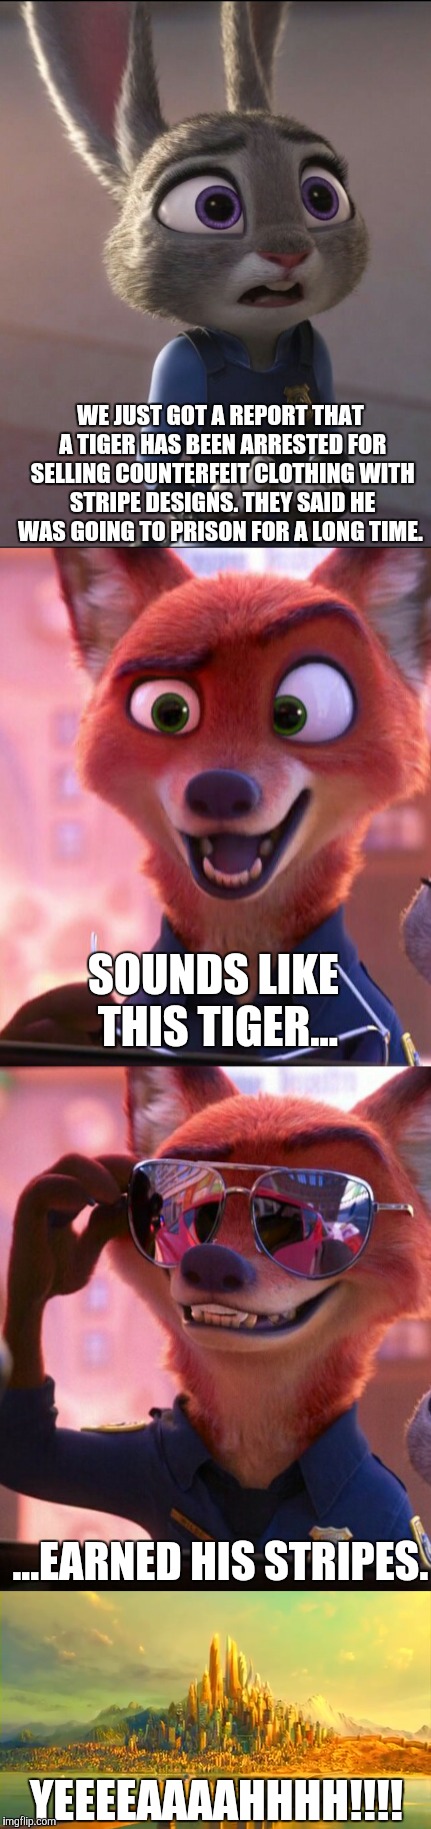 CSI: Zootopia 9 | WE JUST GOT A REPORT THAT A TIGER HAS BEEN ARRESTED FOR SELLING COUNTERFEIT CLOTHING WITH STRIPE DESIGNS. THEY SAID HE WAS GOING TO PRISON FOR A LONG TIME. SOUNDS LIKE THIS TIGER... ...EARNED HIS STRIPES. YEEEEAAAAHHHH!!!! | image tagged in zootopia,judy hopps,nick wilde,parody,funny,memes | made w/ Imgflip meme maker